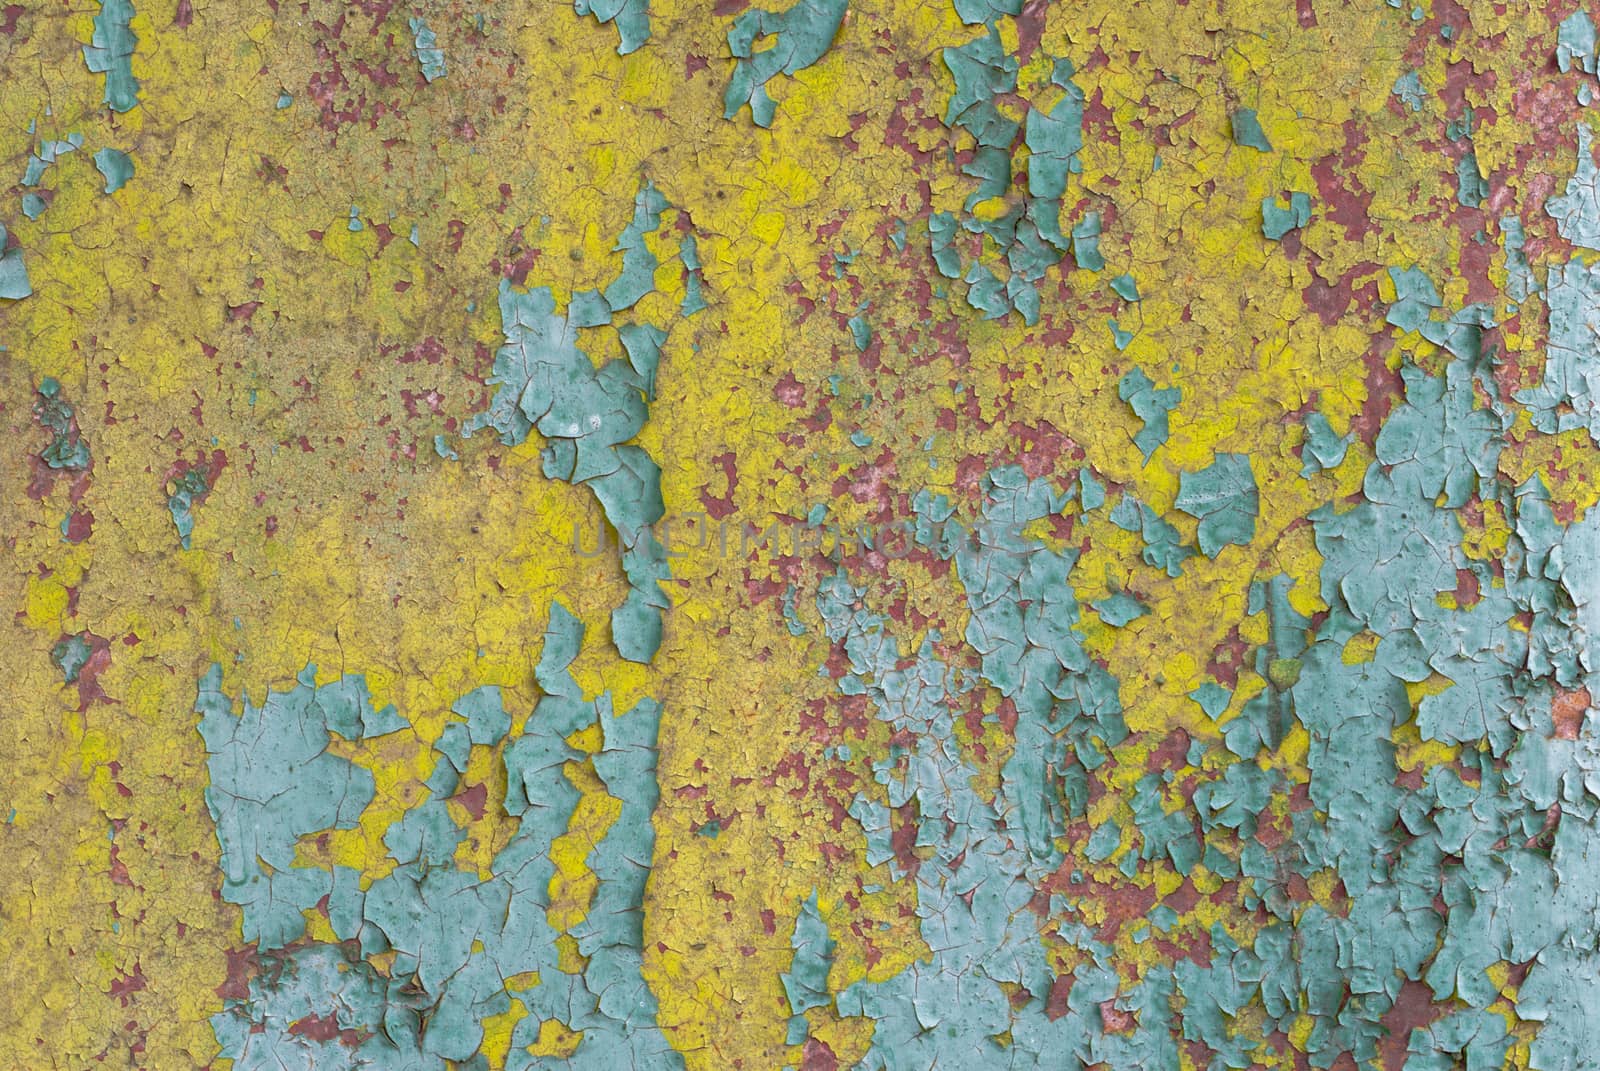 chipped paint on iron surface, great background or texture for your project by uvisni